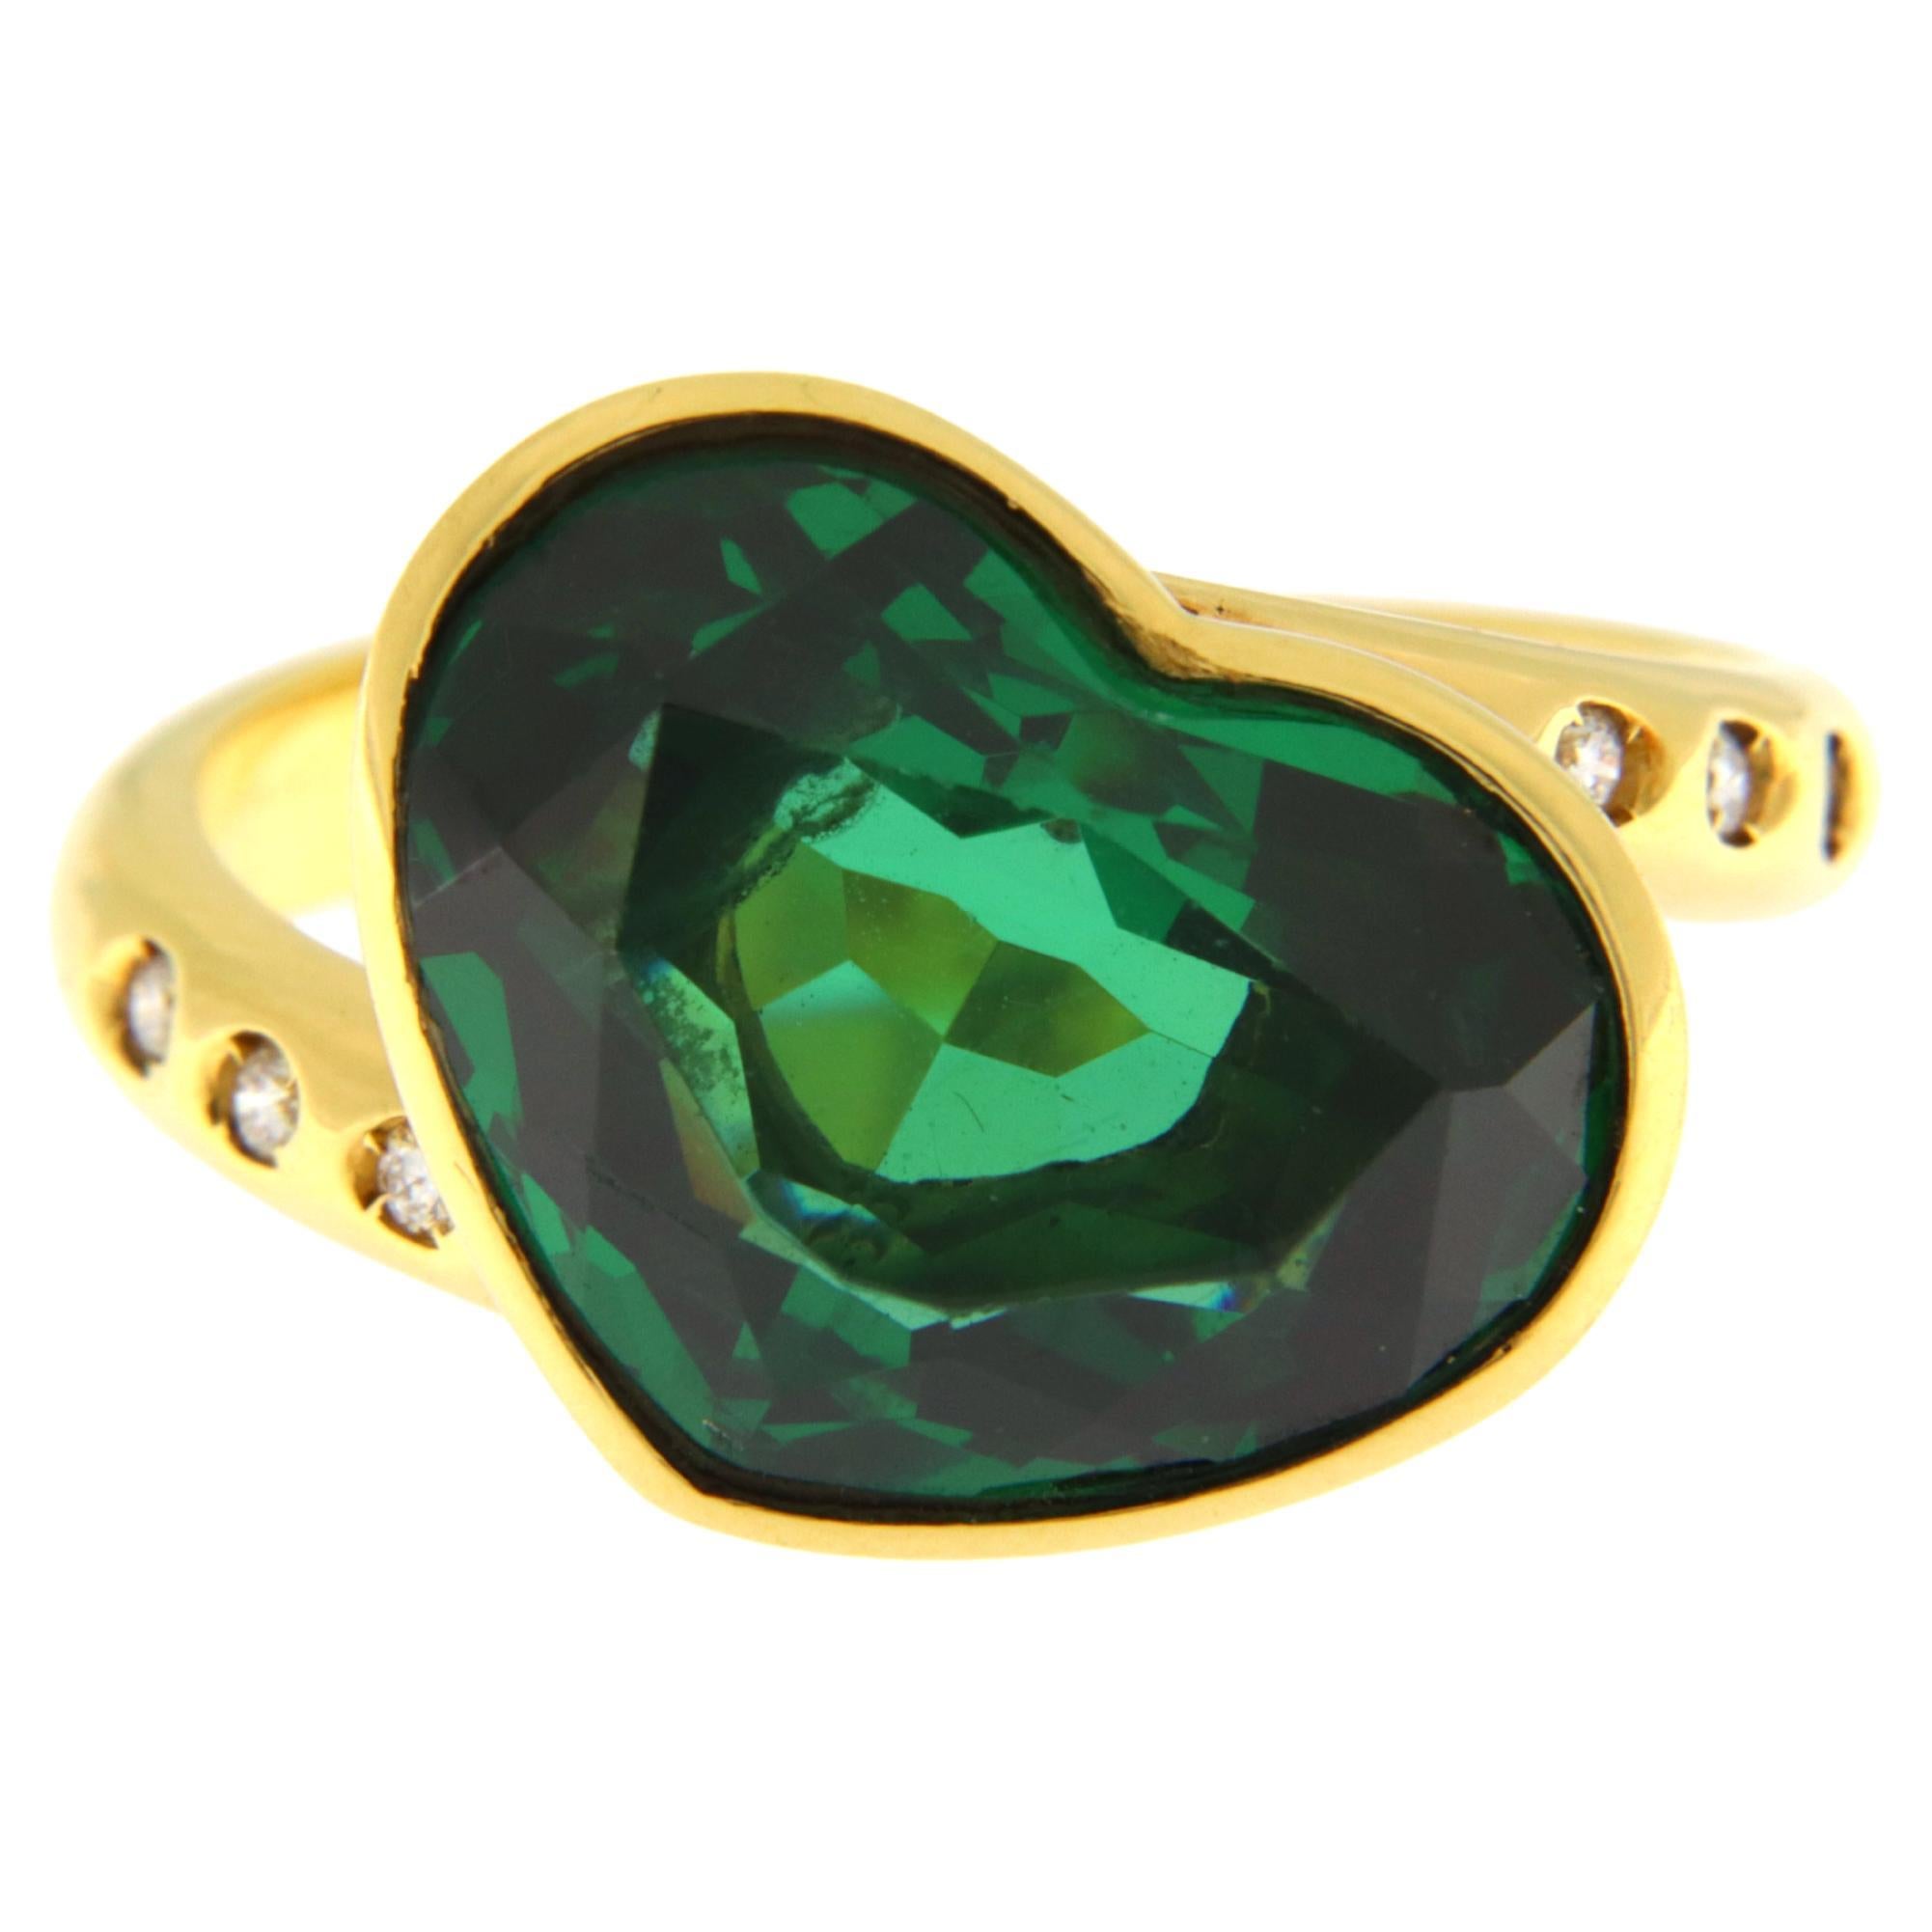 18 Kt Yellow Gold Ring with Diamonds and a Green Tourmaline Heart